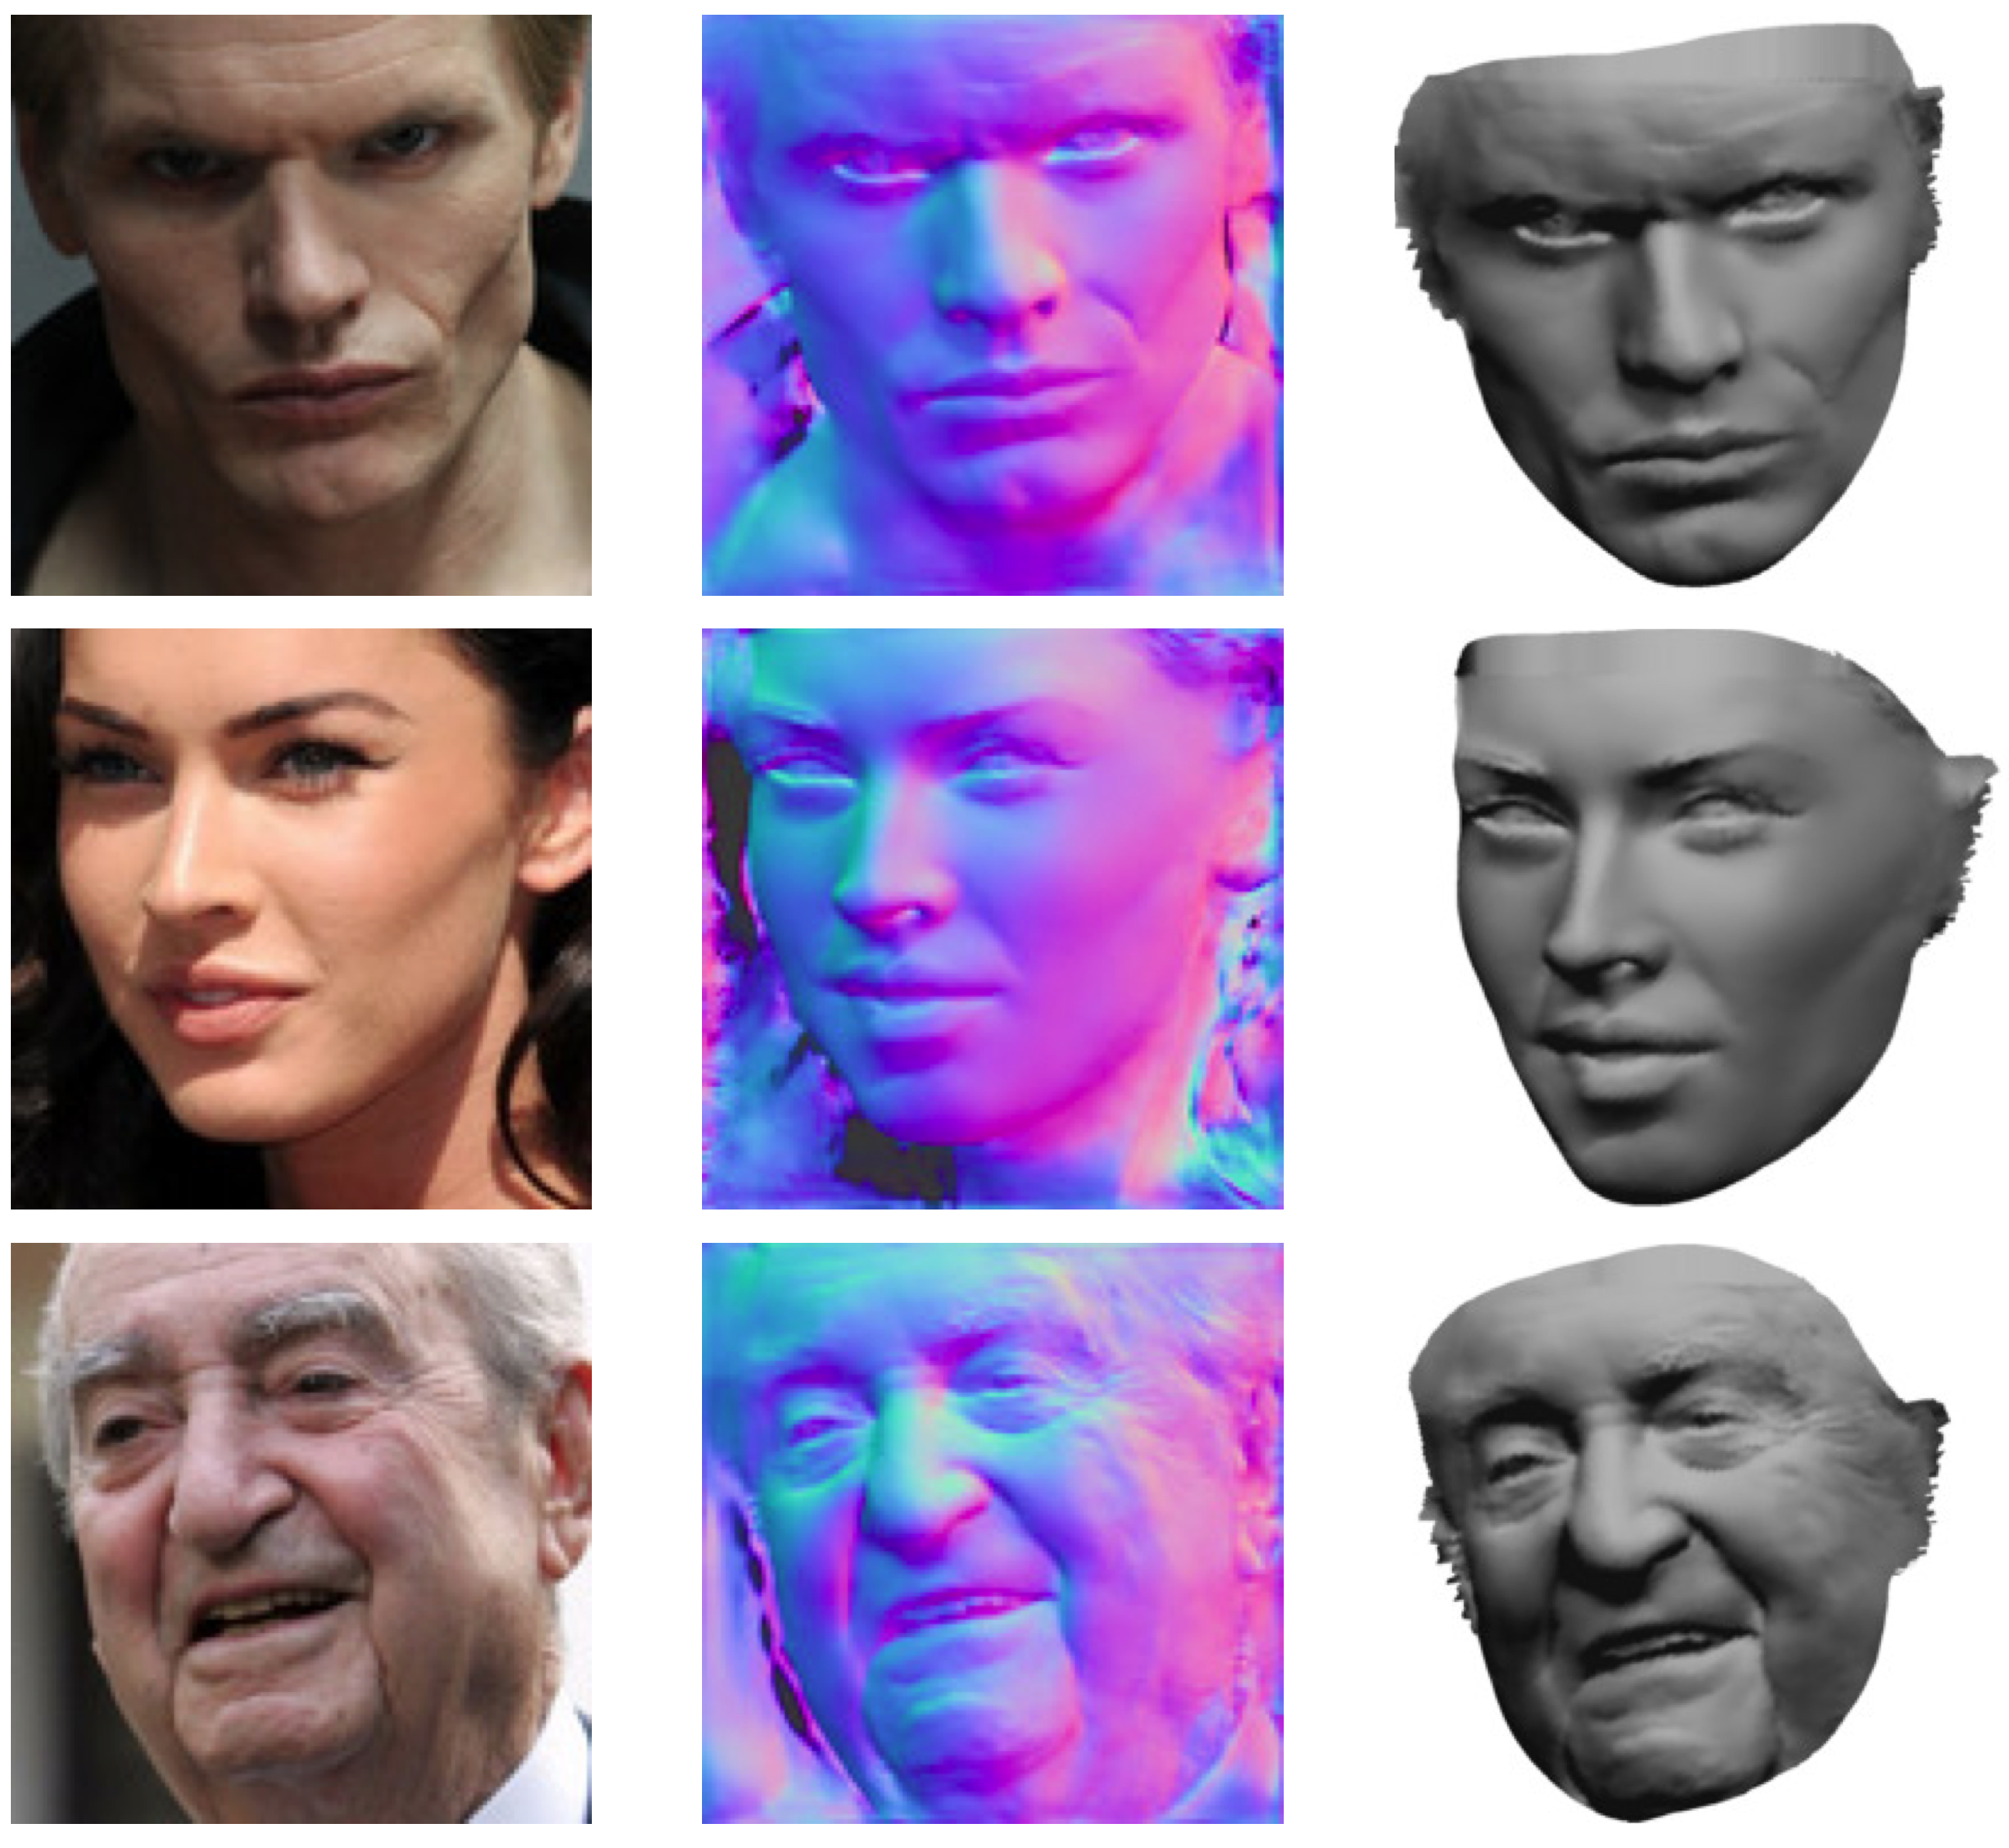 We have proposed an approach that can predict accurate face normals (second column) from a single input image. These normals can then be used to enhance a coarse geometry (third column).